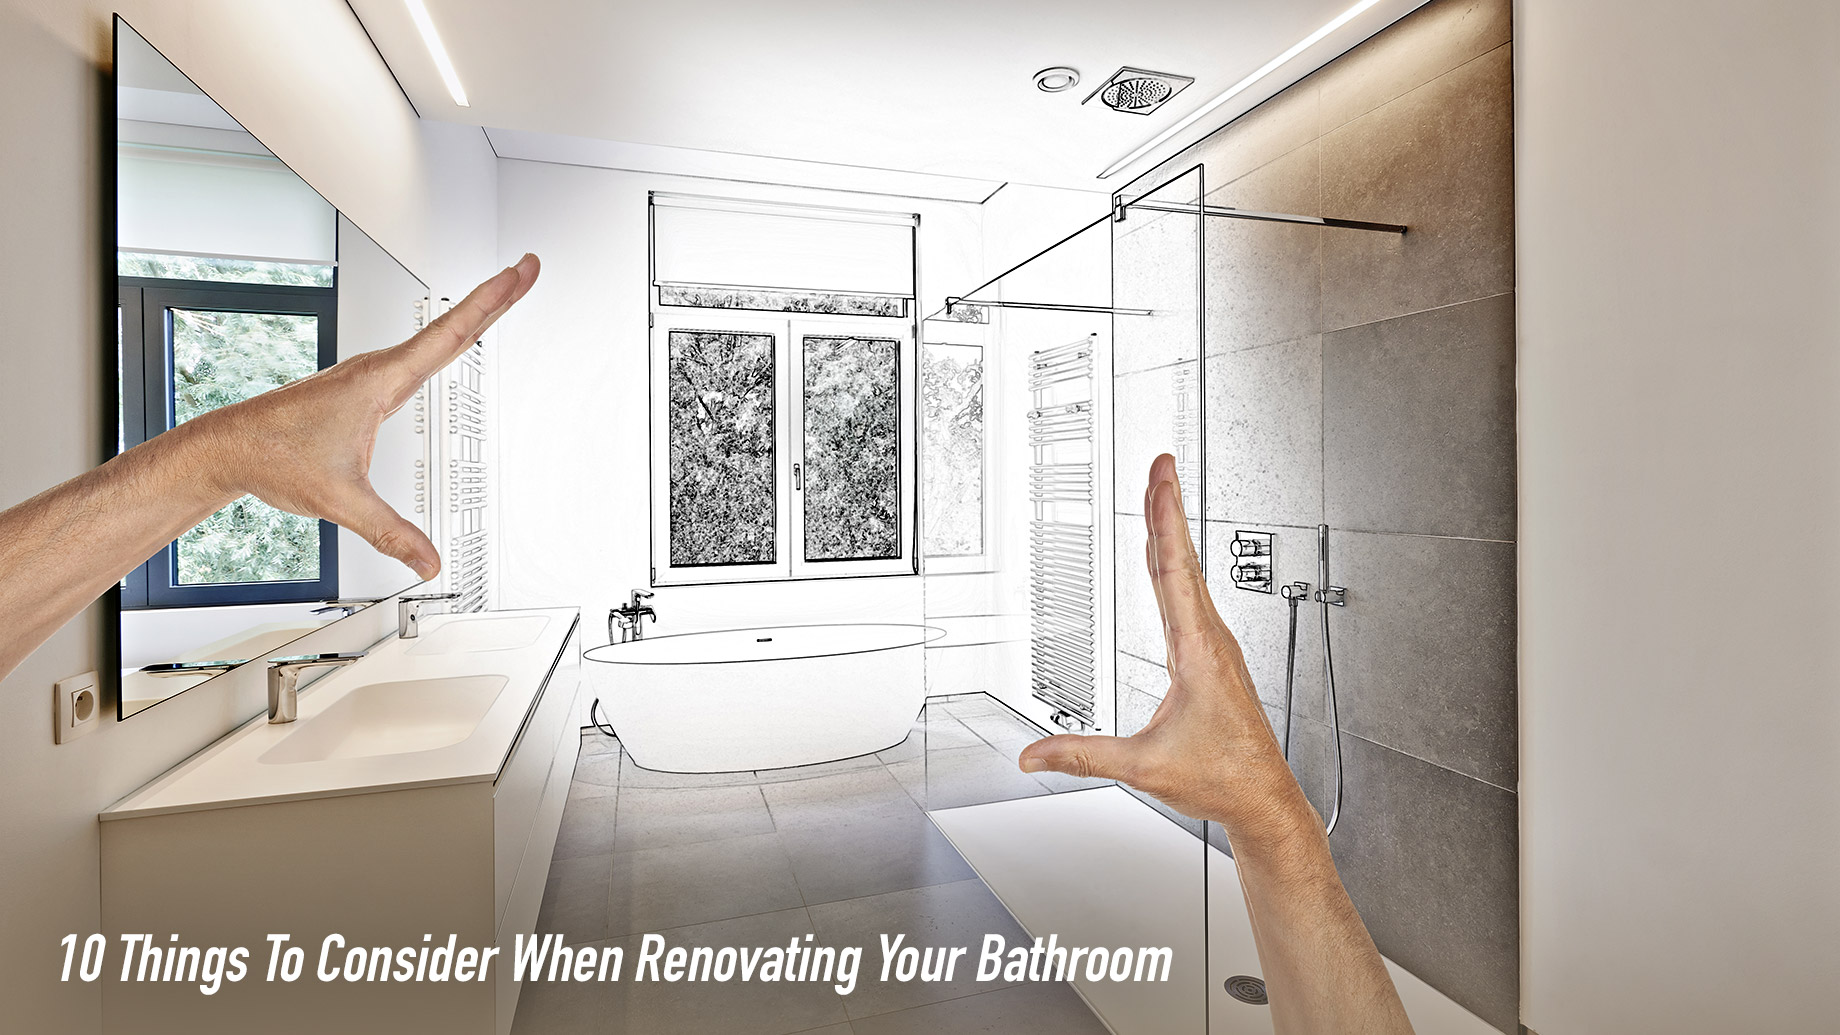 10 Things To Consider When Renovating Your Bathroom